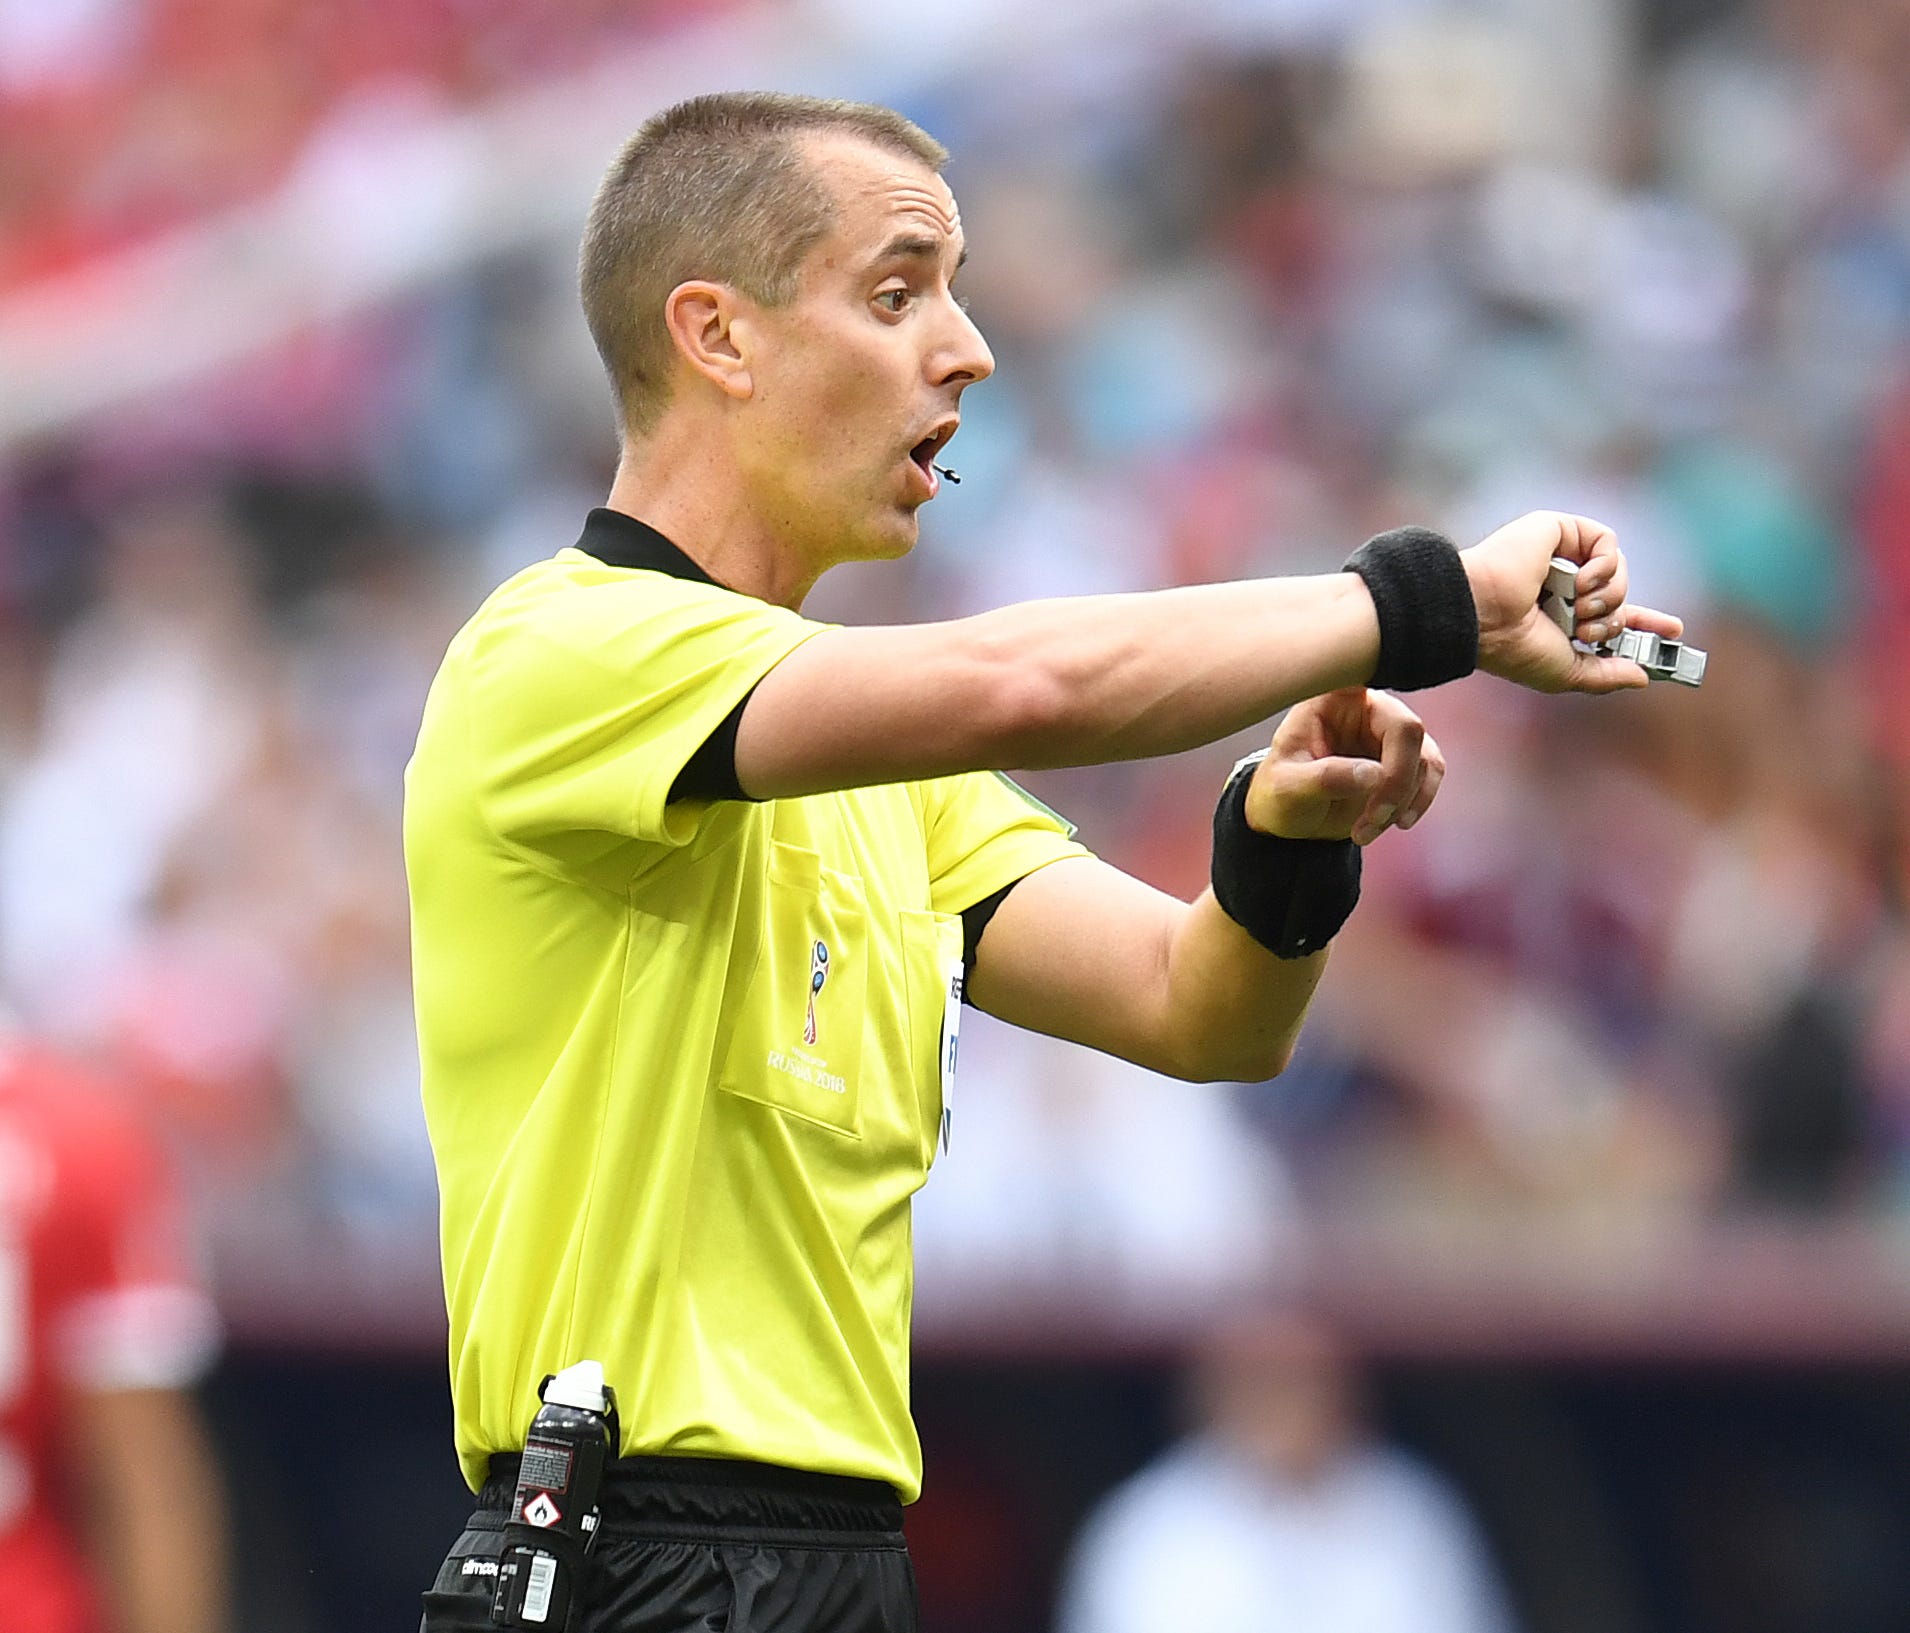 Referee Mark Geiger shown in Group D play during the FIFA World Cup 2018 at Spartak Stadium.